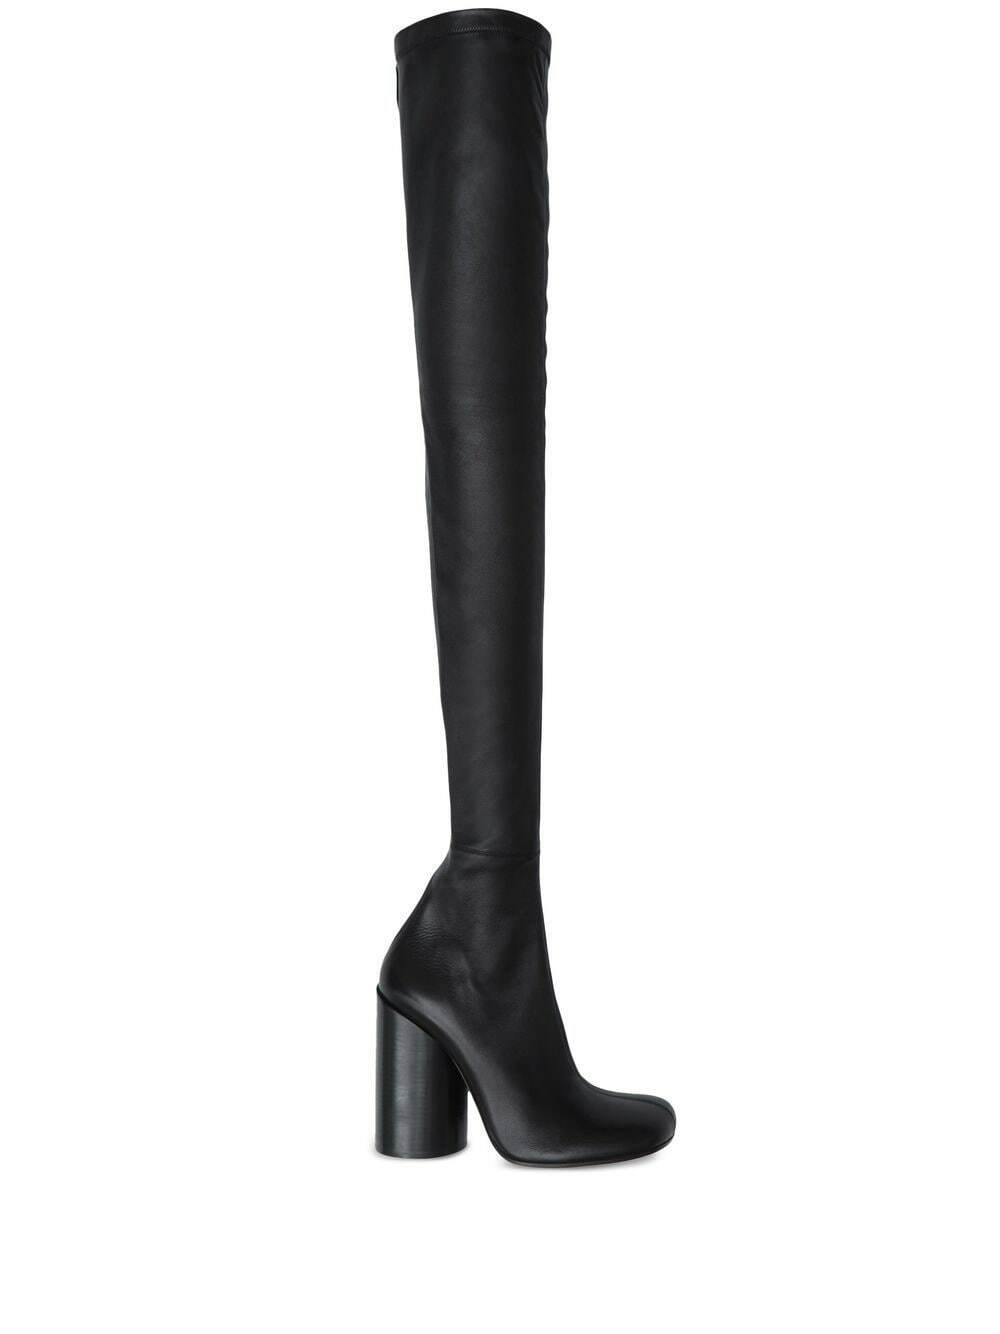 BURBERRY - Leather Over The Knee Boots Burberry